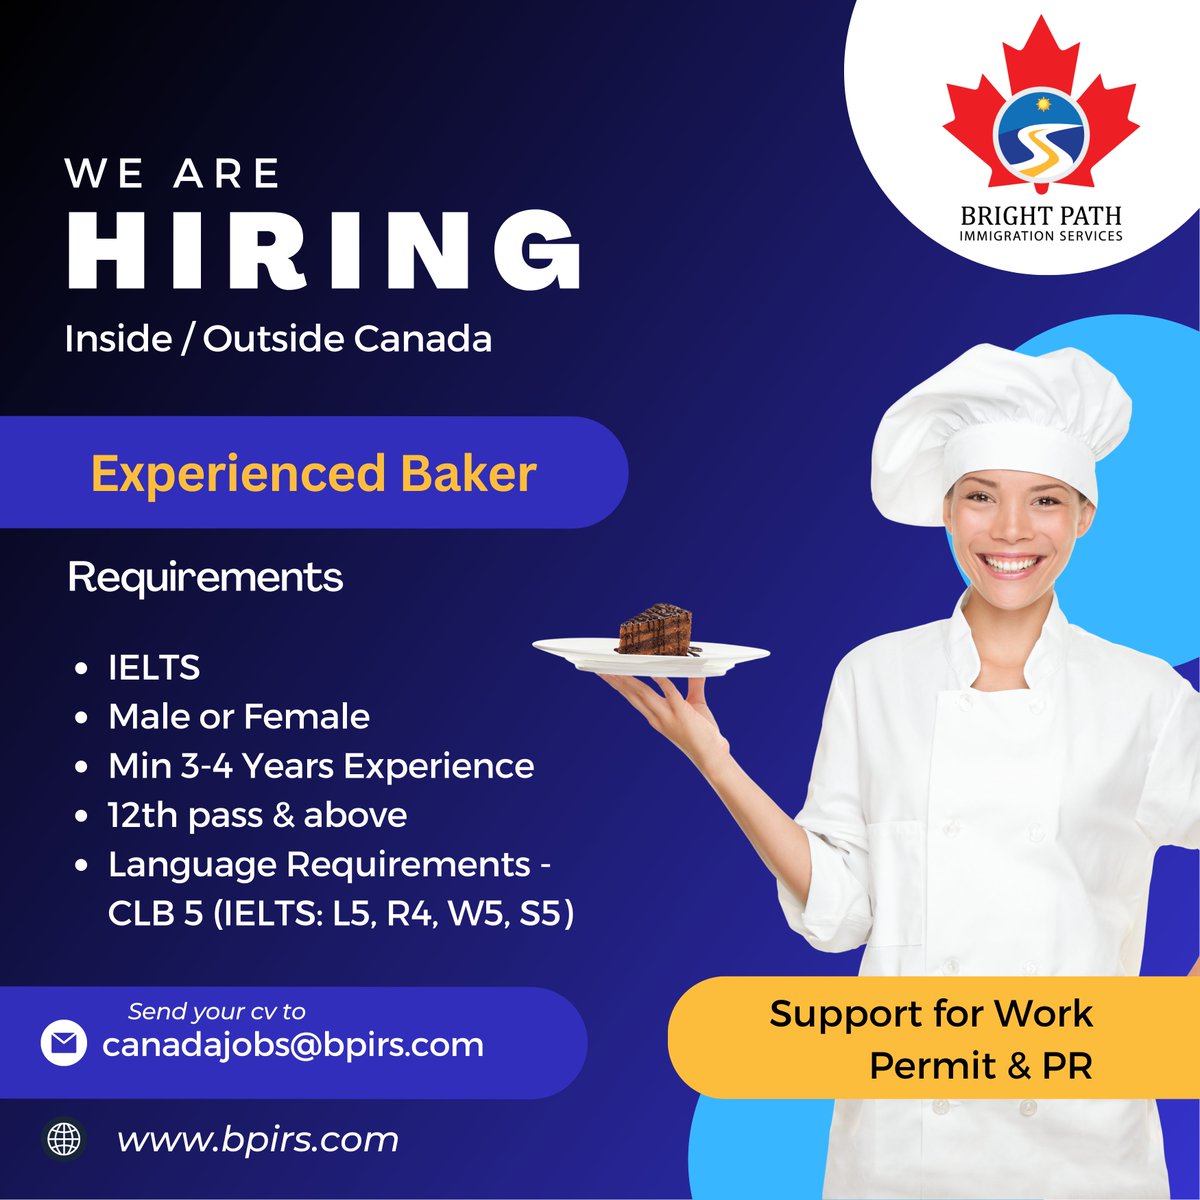 We're Hiring! Experienced Baker
Inside / Outside Canada

🍁CONTACT🍁
📧: canadajobs@bpirs.com
🌐: bpirs.com

#bpirs #canadaimmigration #canada #workpermitcanada #permanentresident #hiringnow #cook #eperience #joboffering #baker #experience